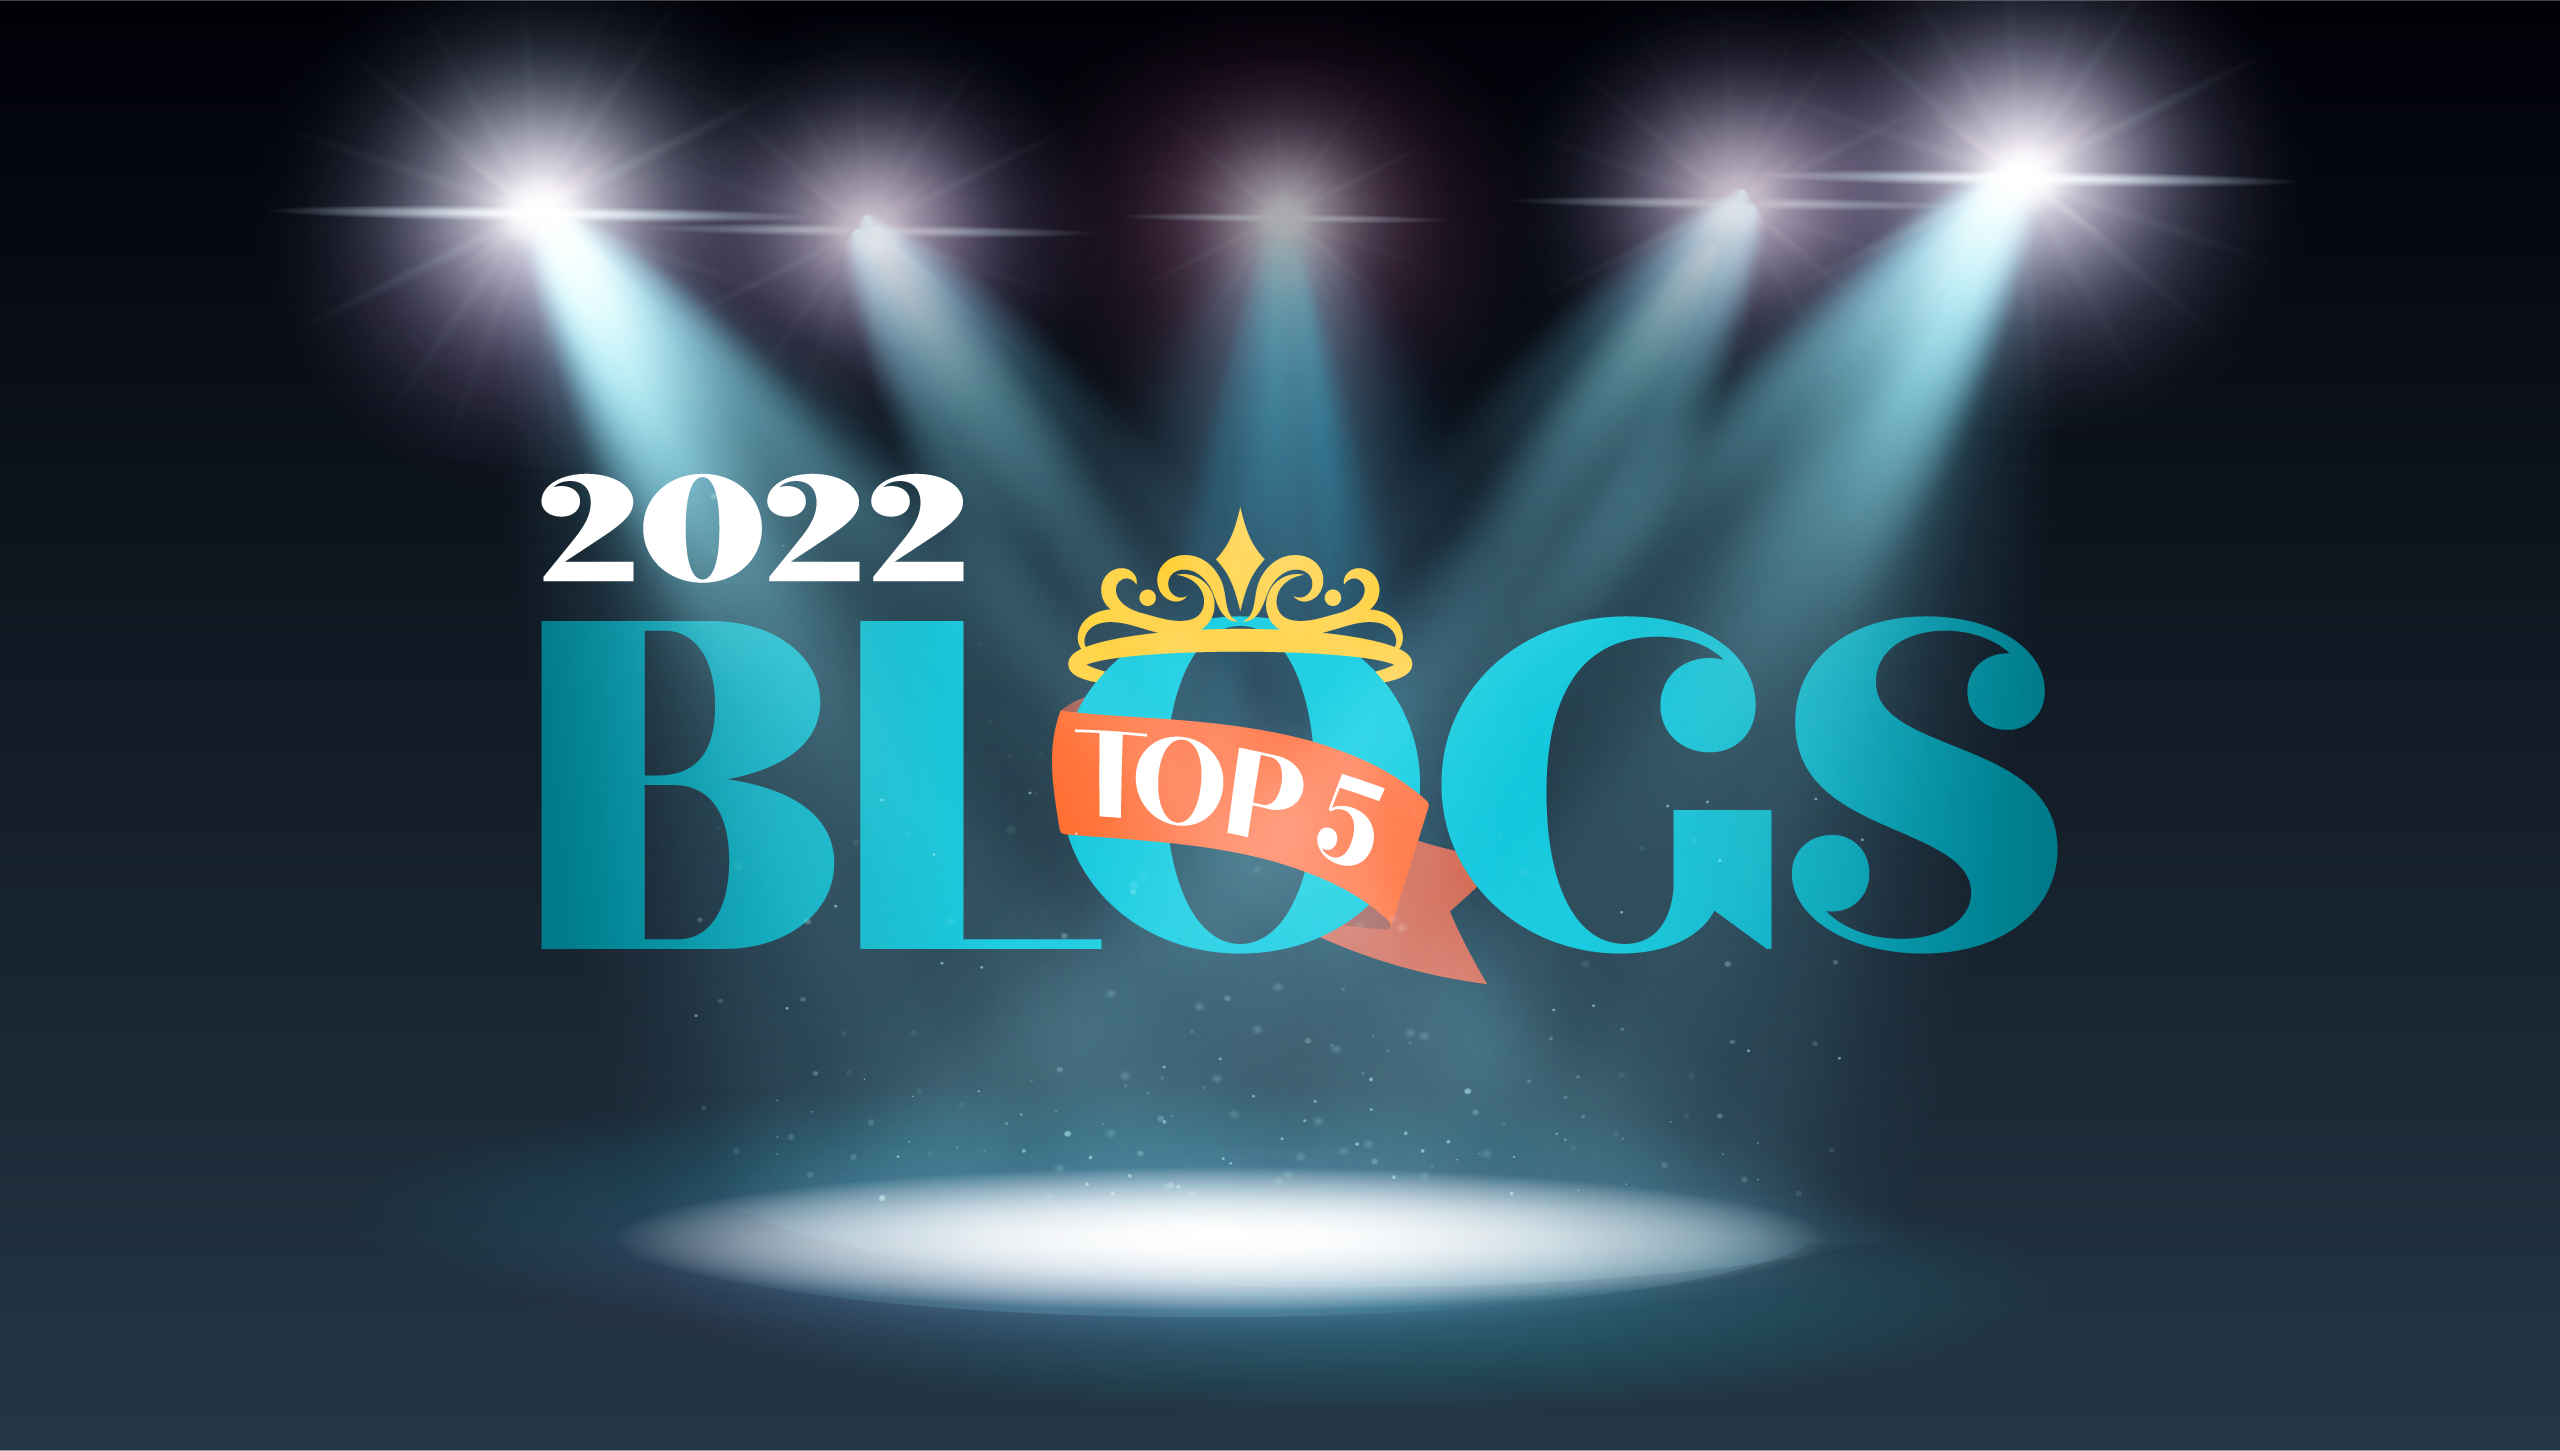 Top 5 Most Popular Blogs from 2022